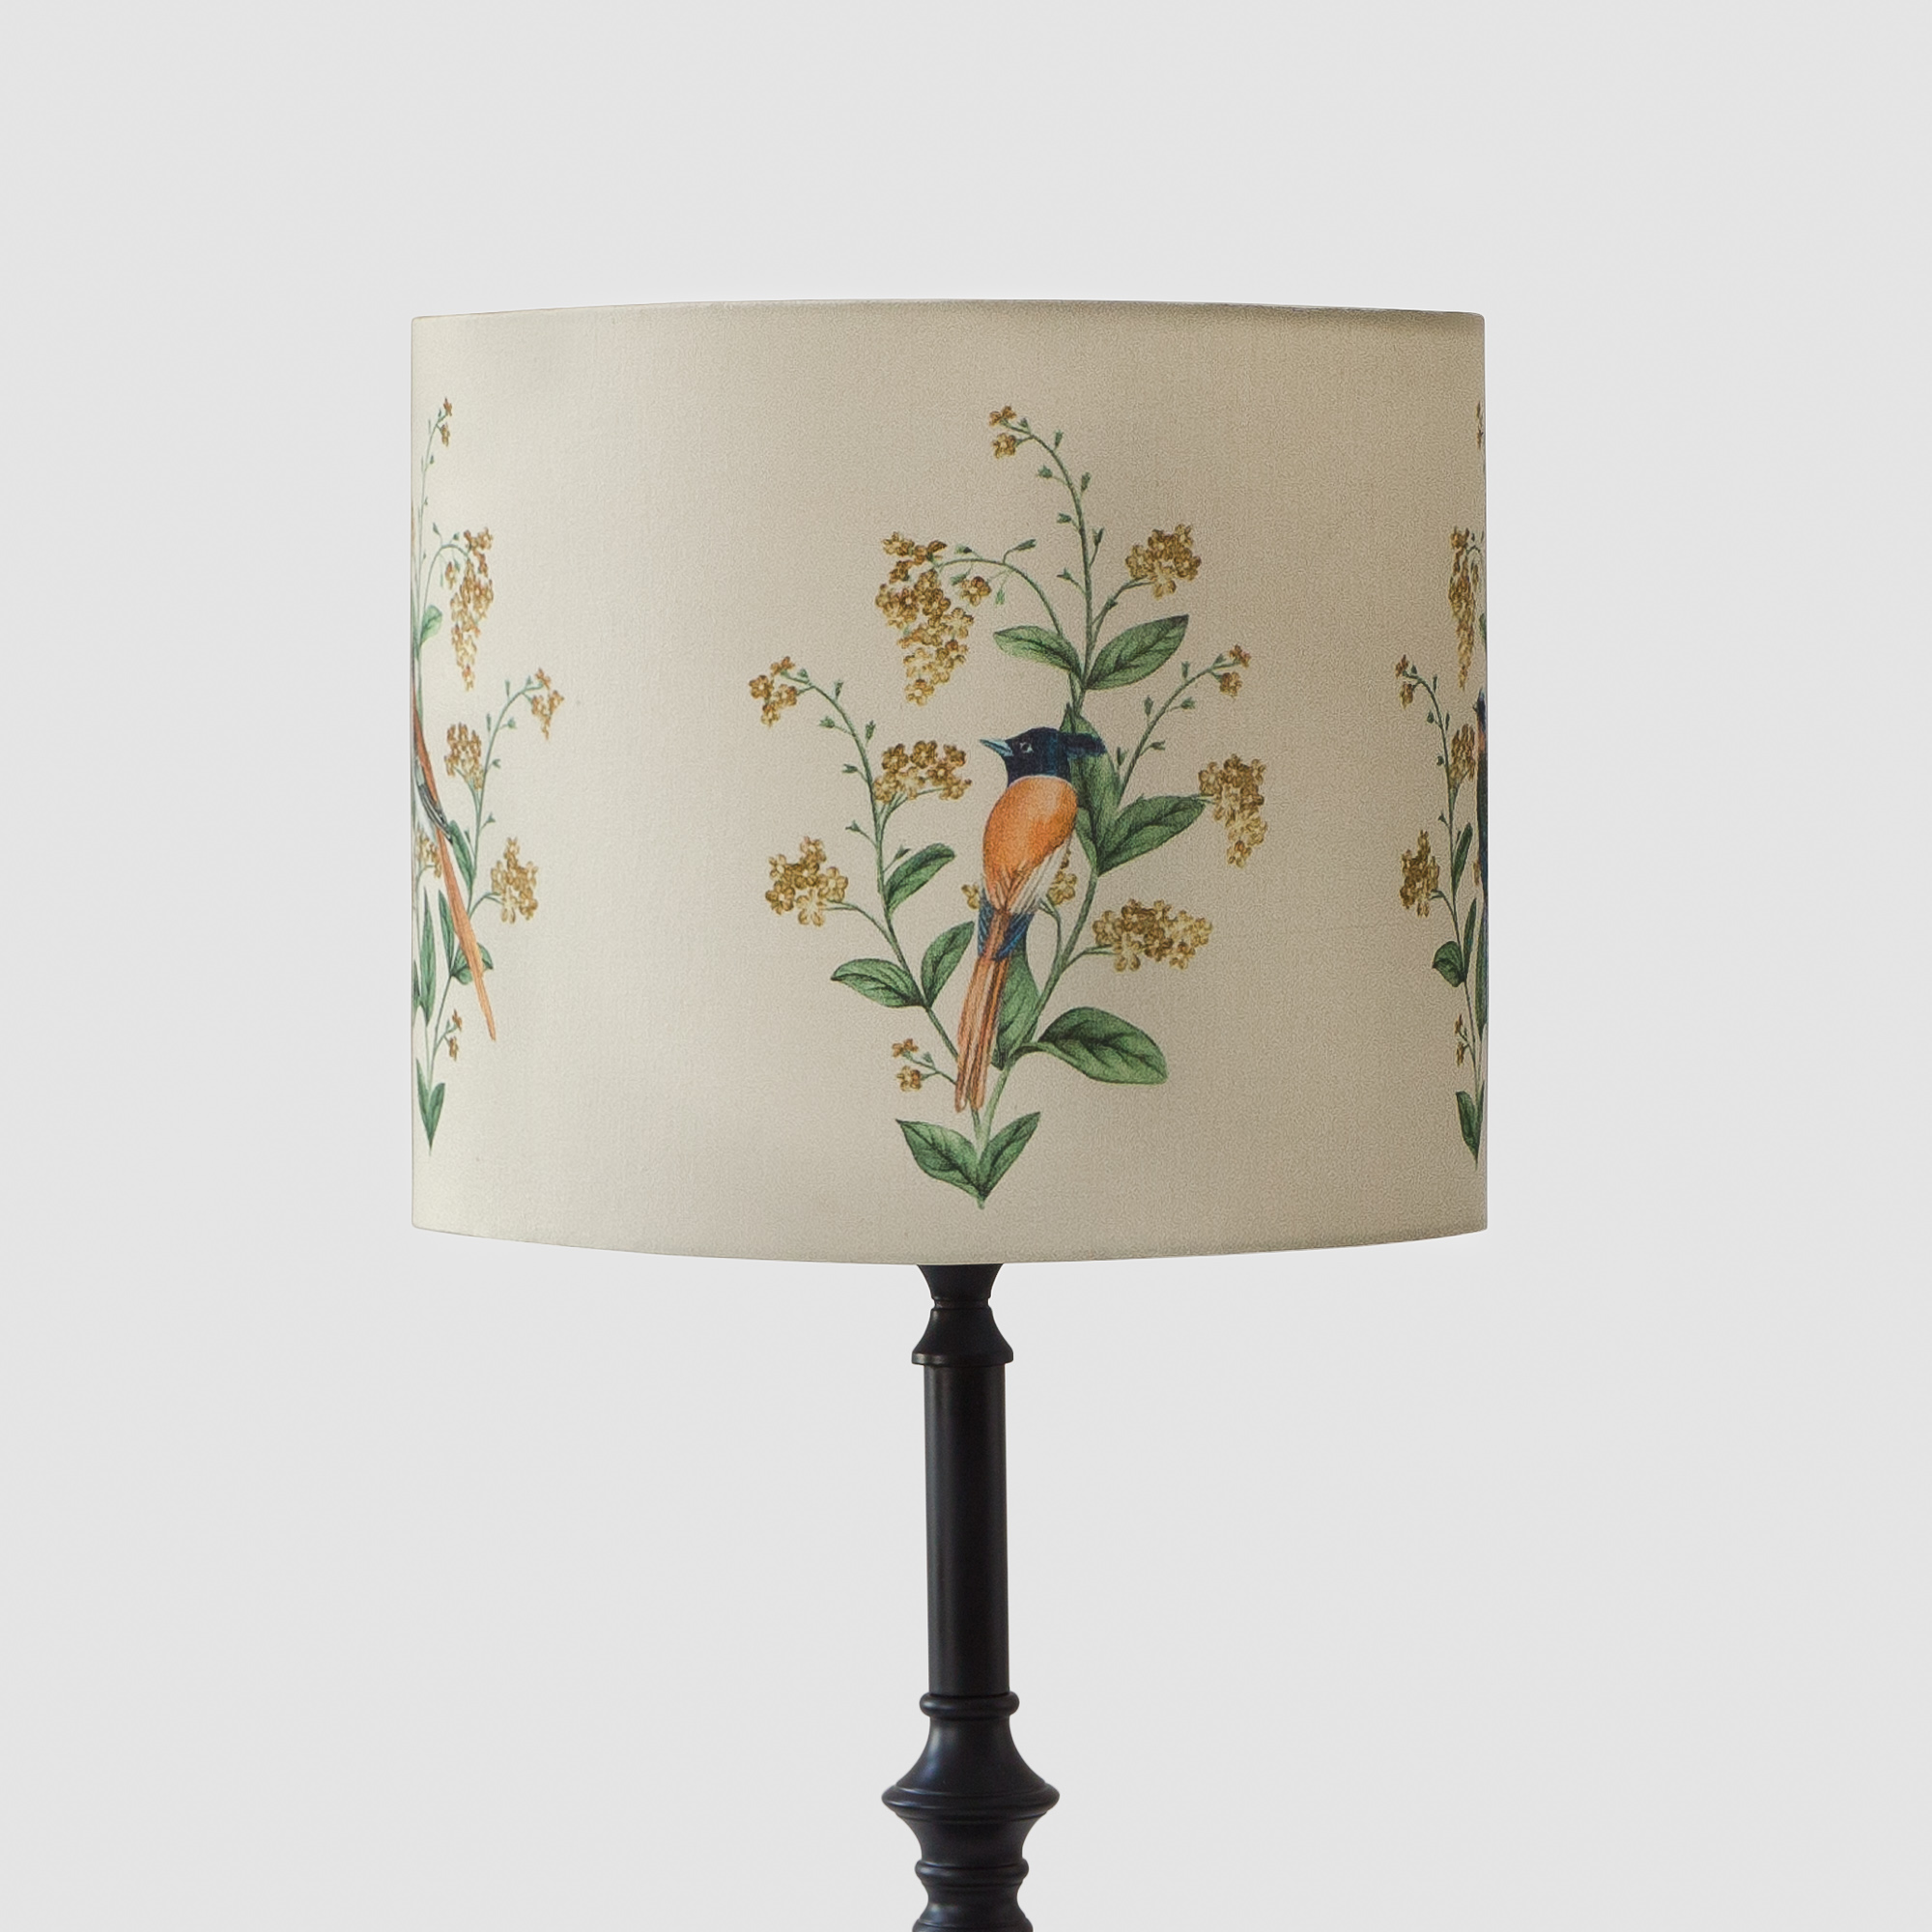 Chalet Cylindrical Table Lampshade - A Persian Corridor Spring